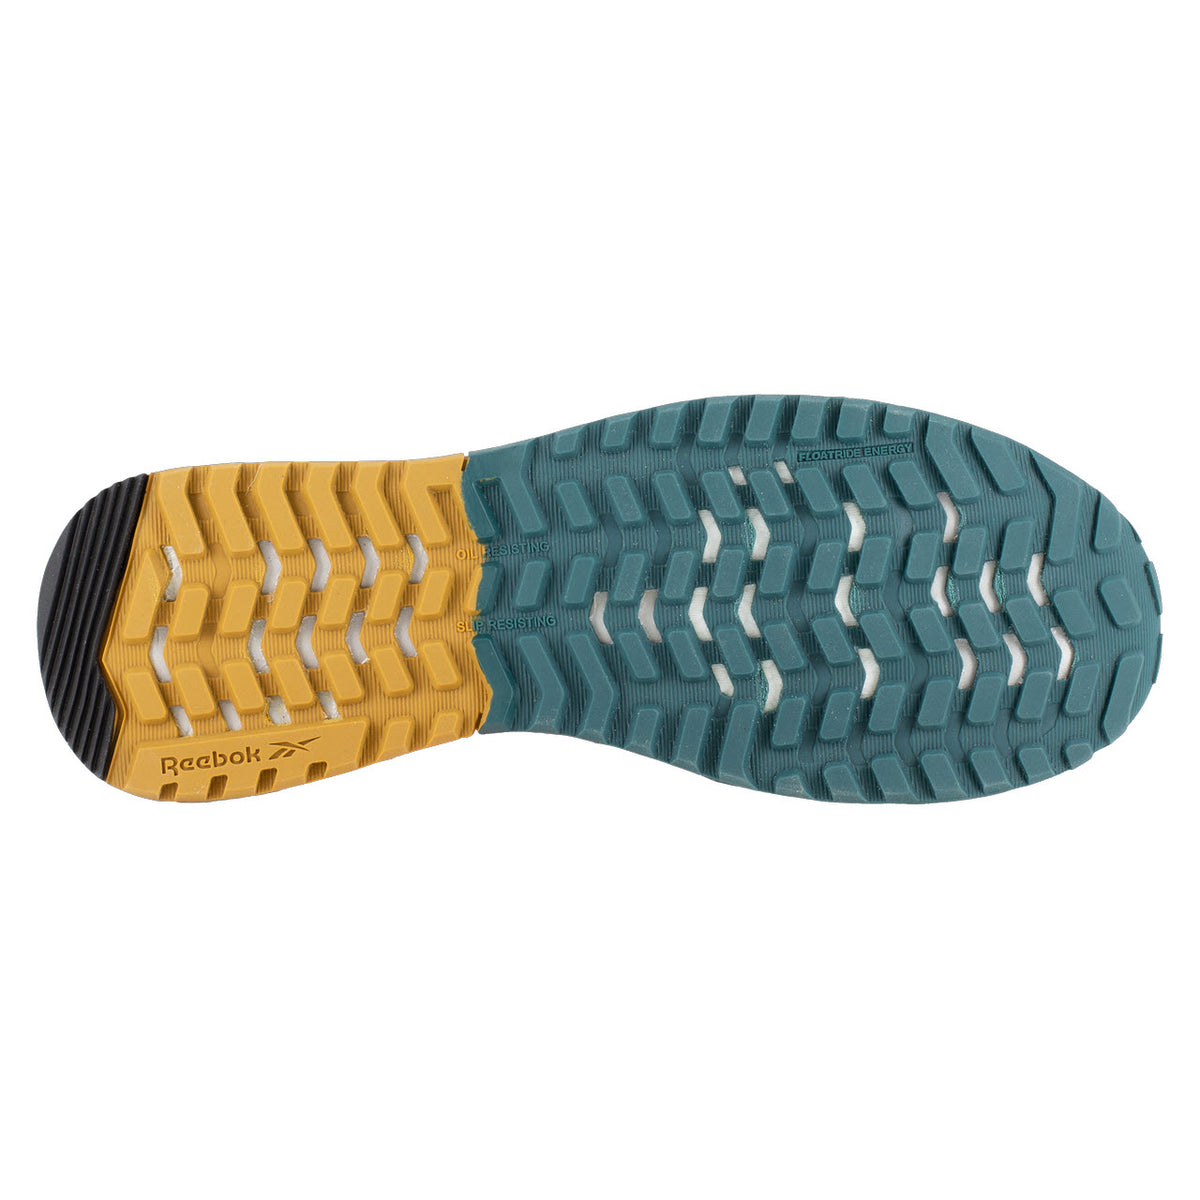 Bottom view of a Reebok Work Nano Low Comp Toe Slate Blue Cherry shoe sole showing a blue and yellow rugged tread pattern with brand name visible.